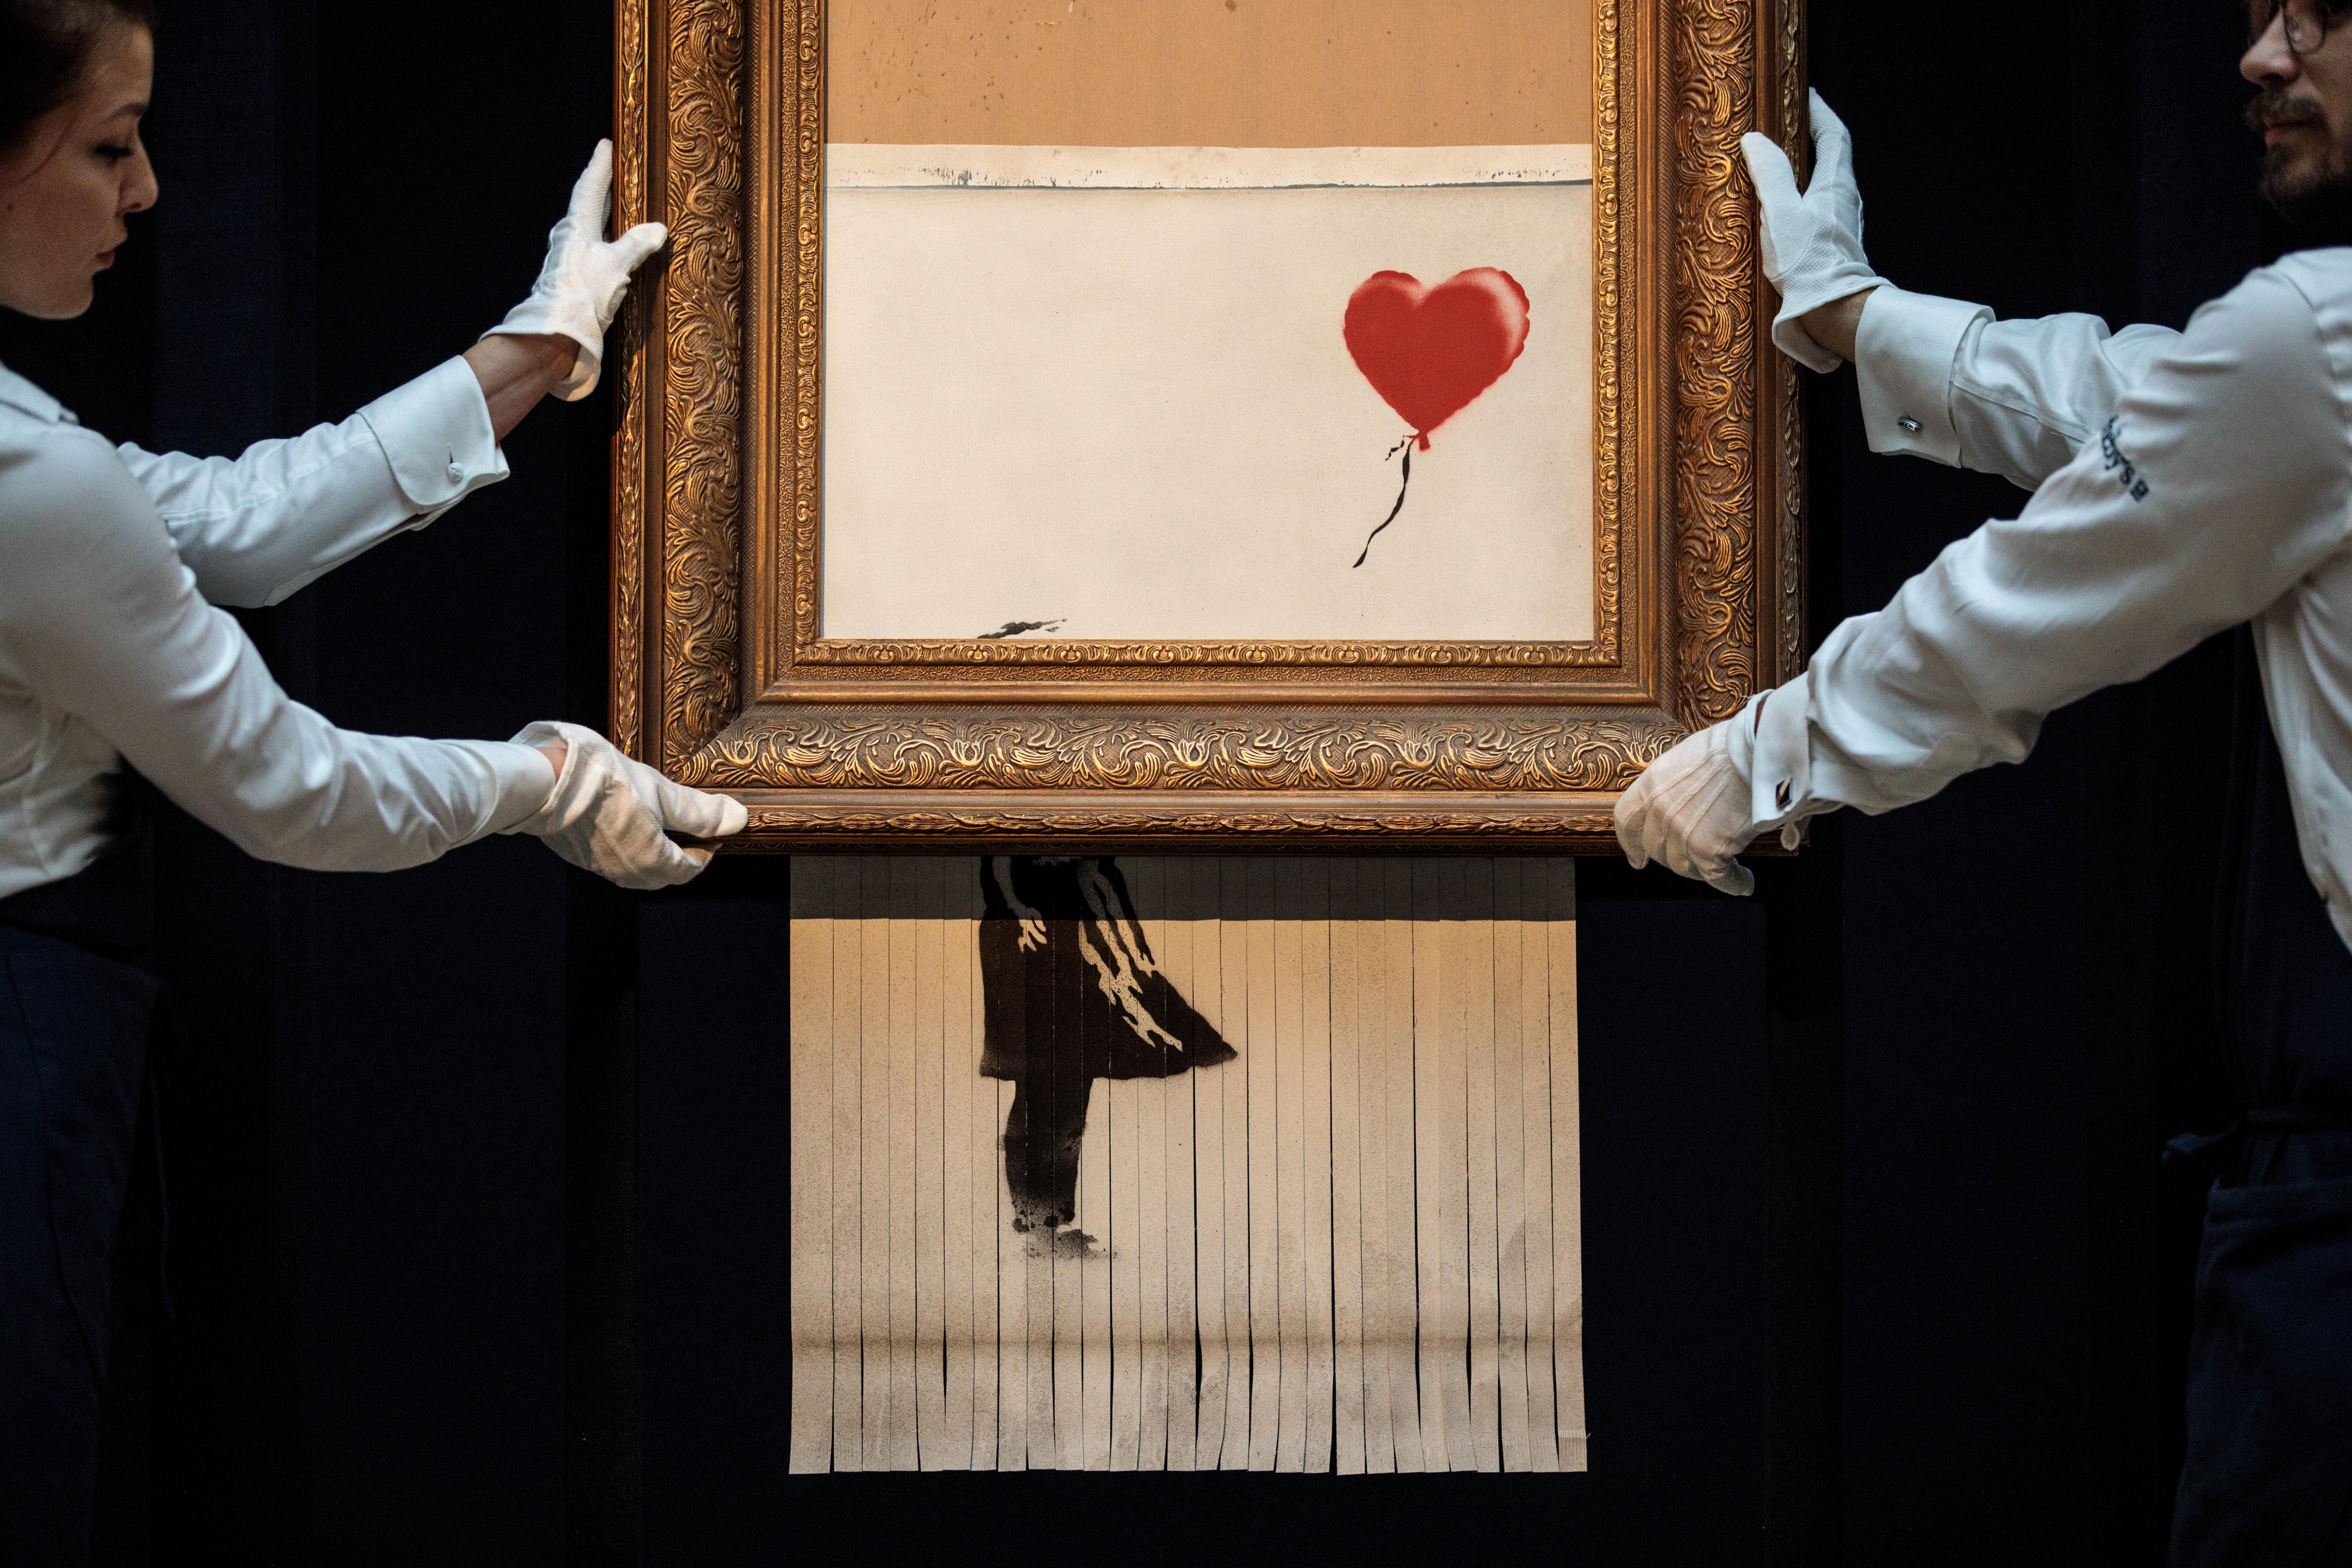 Banksy implies he wanted his partially shredded painting to shred all the way - CBS News4800 x 3200